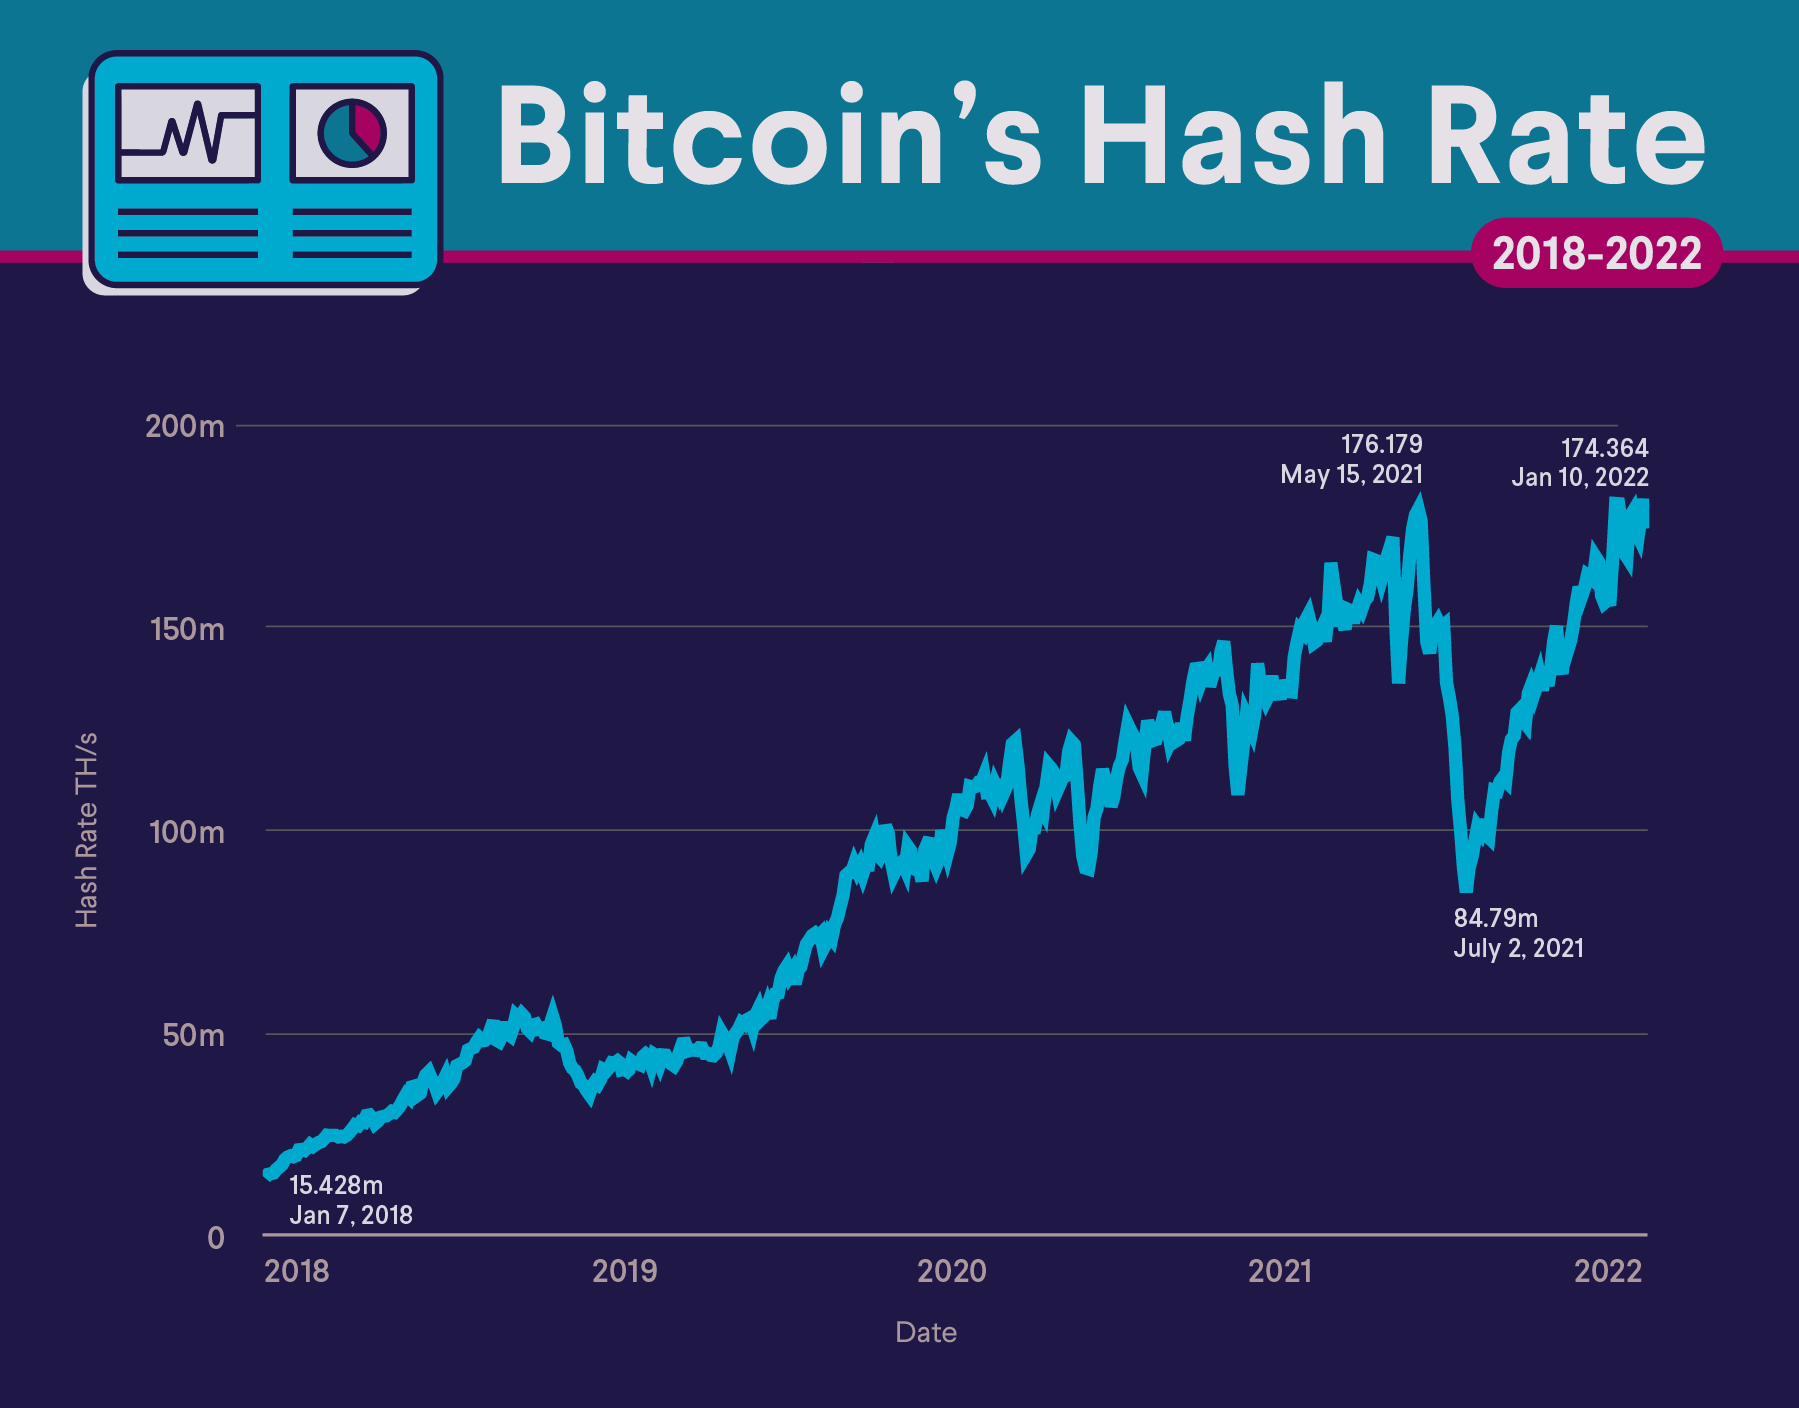 Despite hideously hot summer, bitcoin miners manage 13 EH jump in hash rate - Blockworks